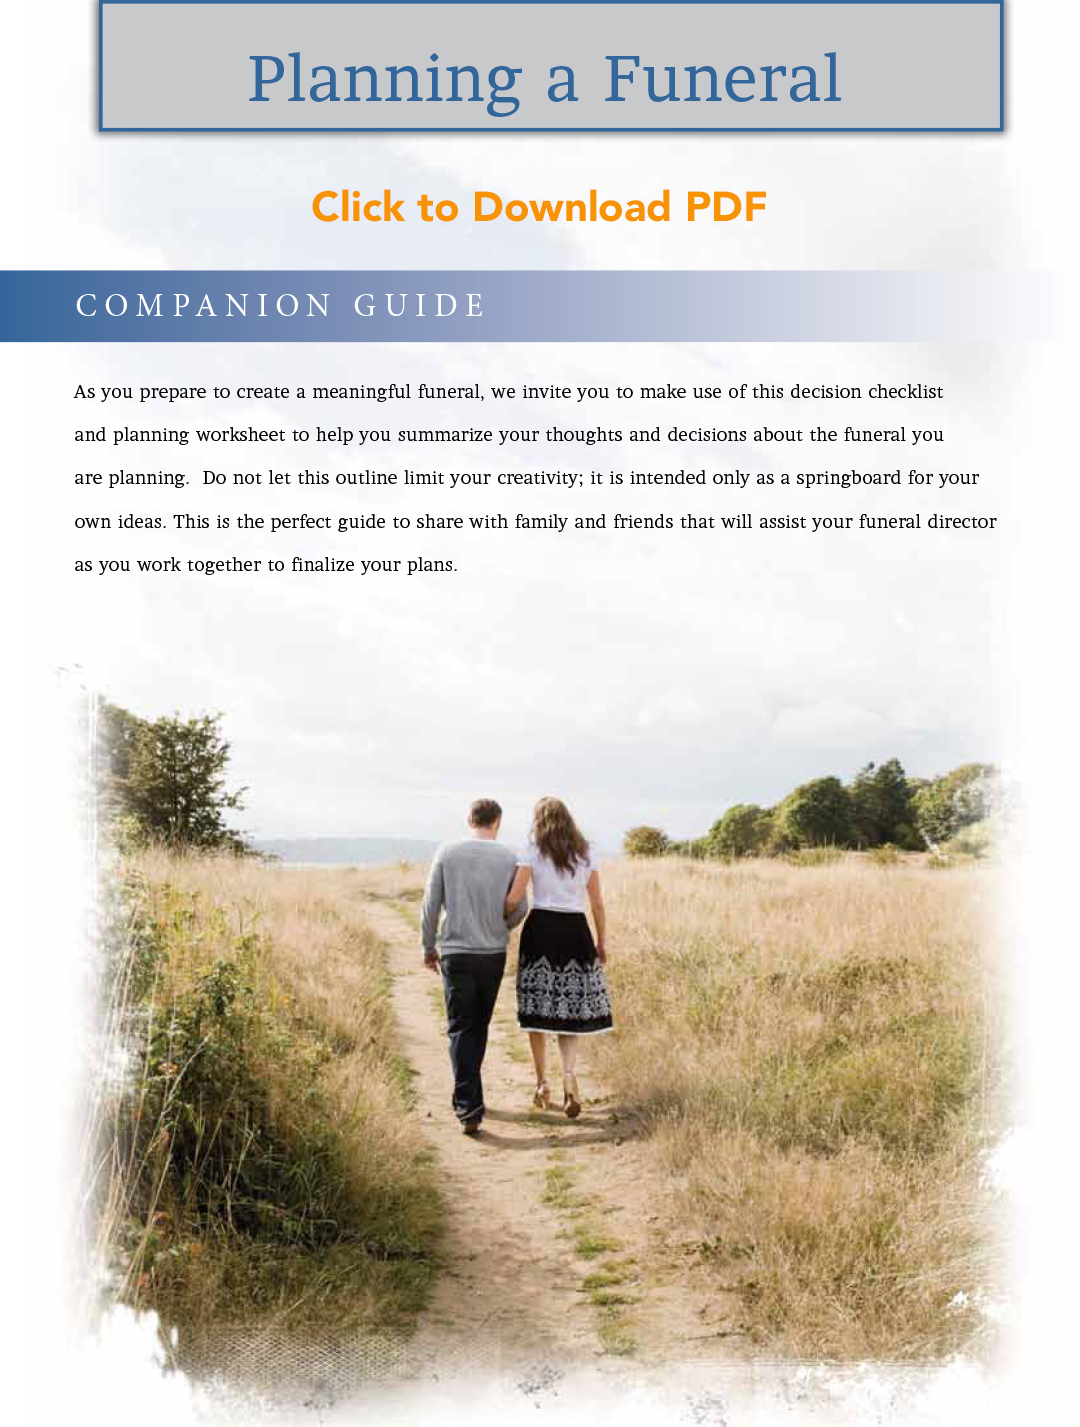 planning a funeral, funeral companion guide, legacy care partners